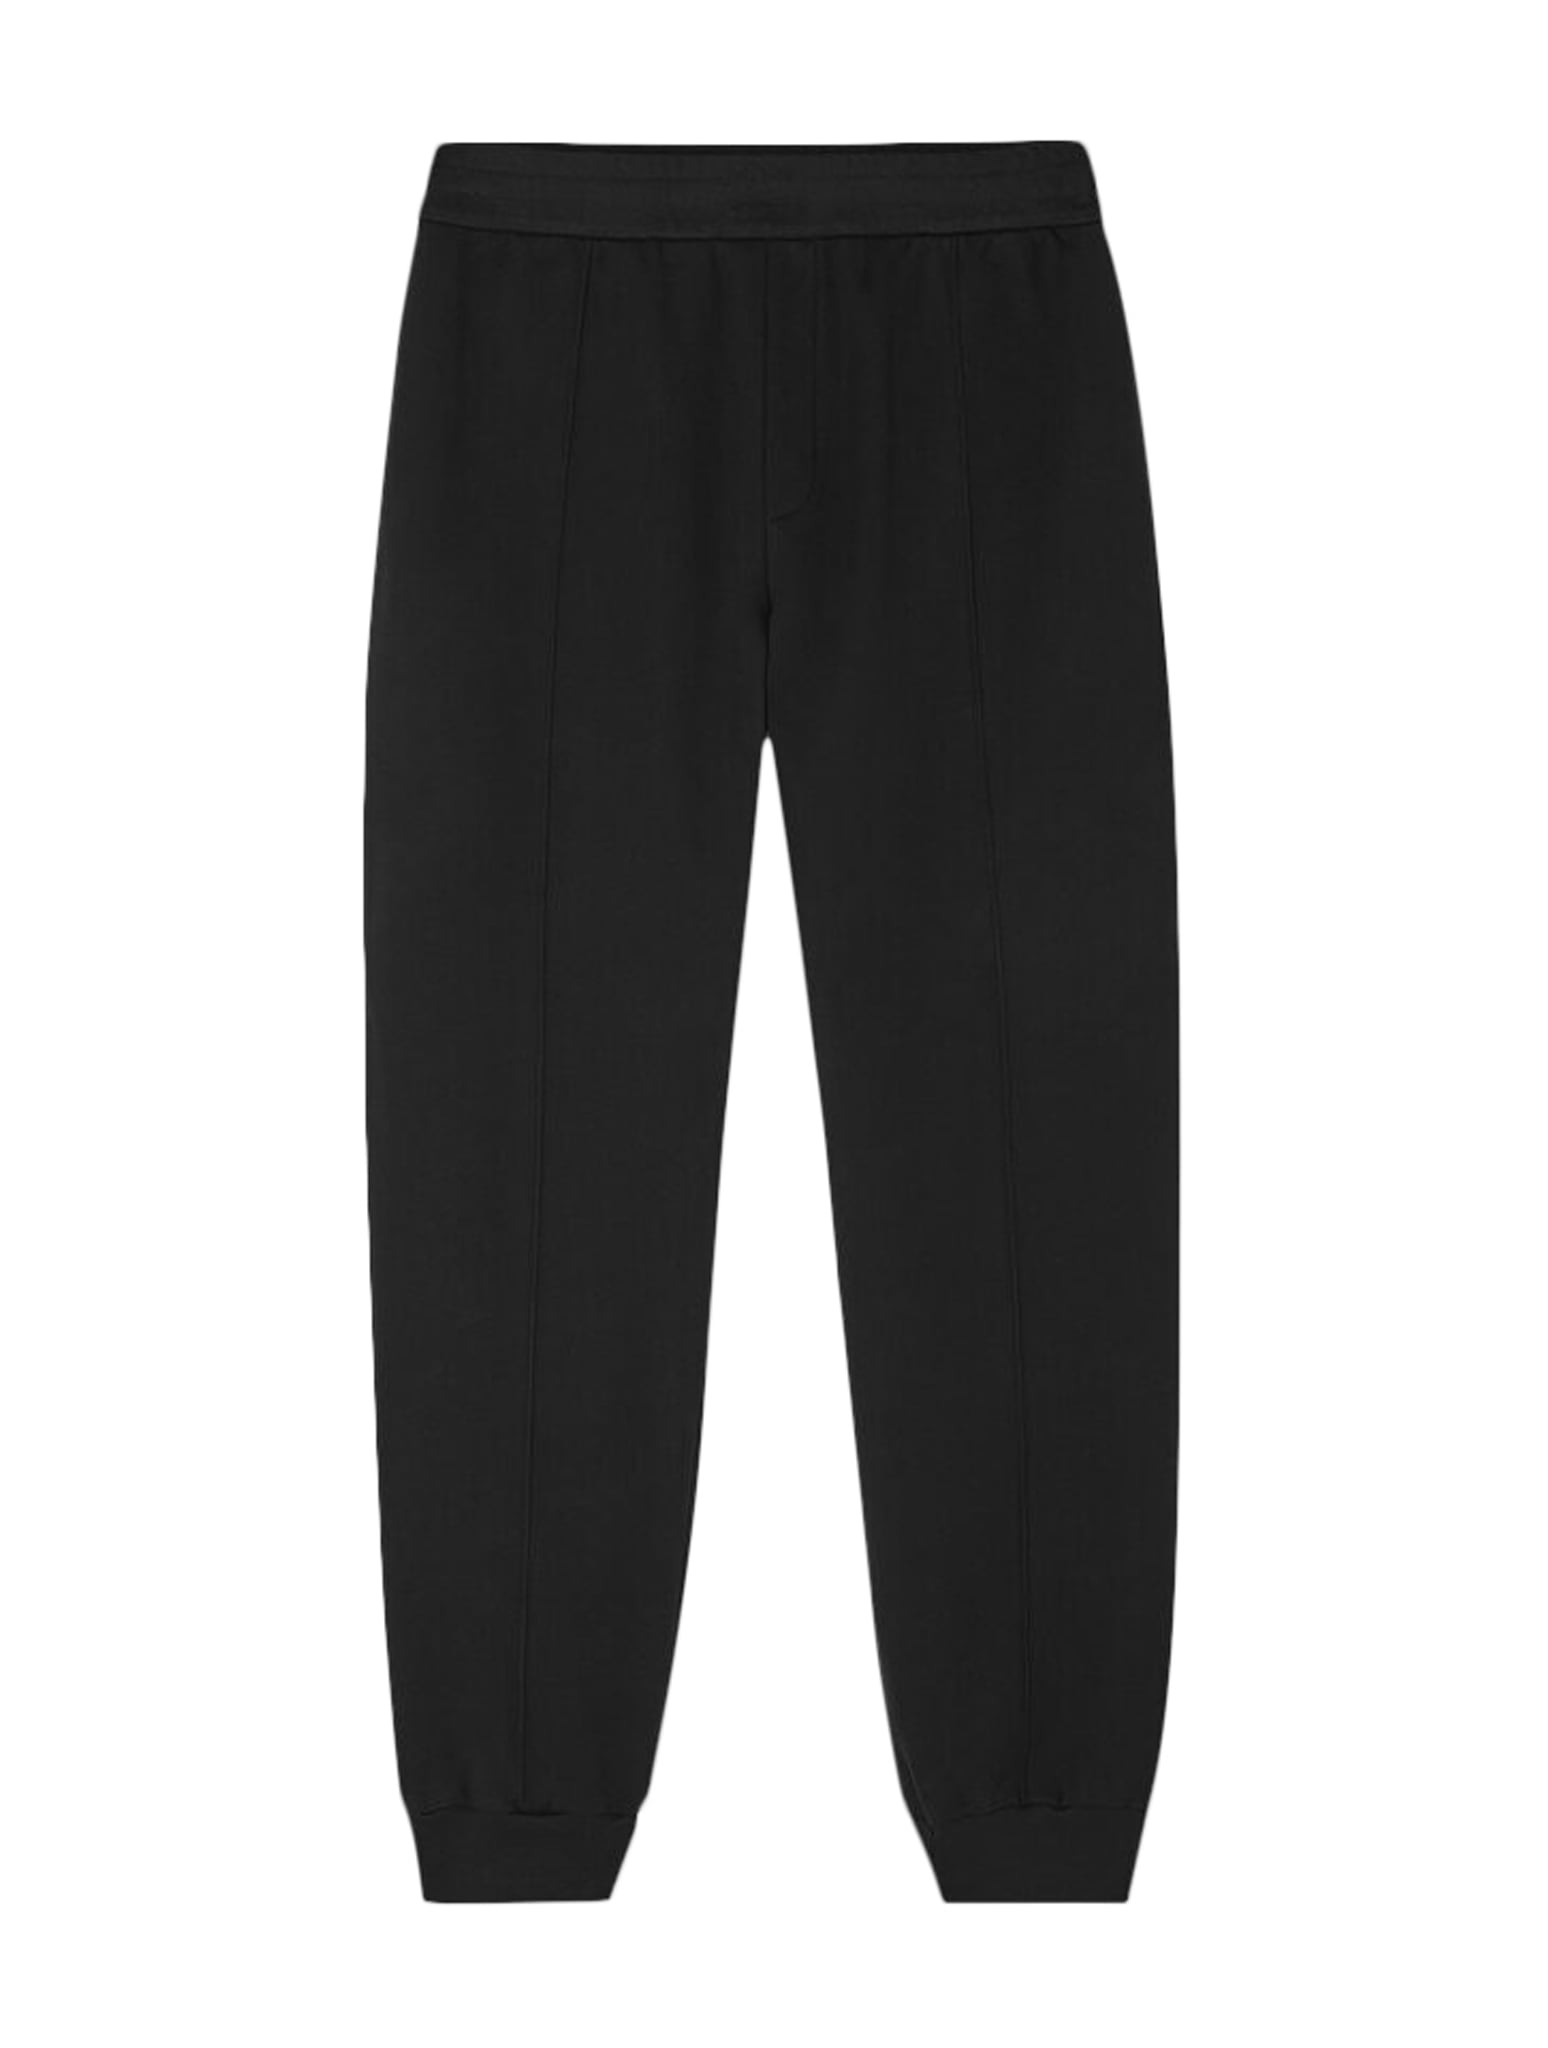 VERSACE SWEATPANT NON-BRUSHED SWEATSHIRT FABRIC + TILES EMBROIDER